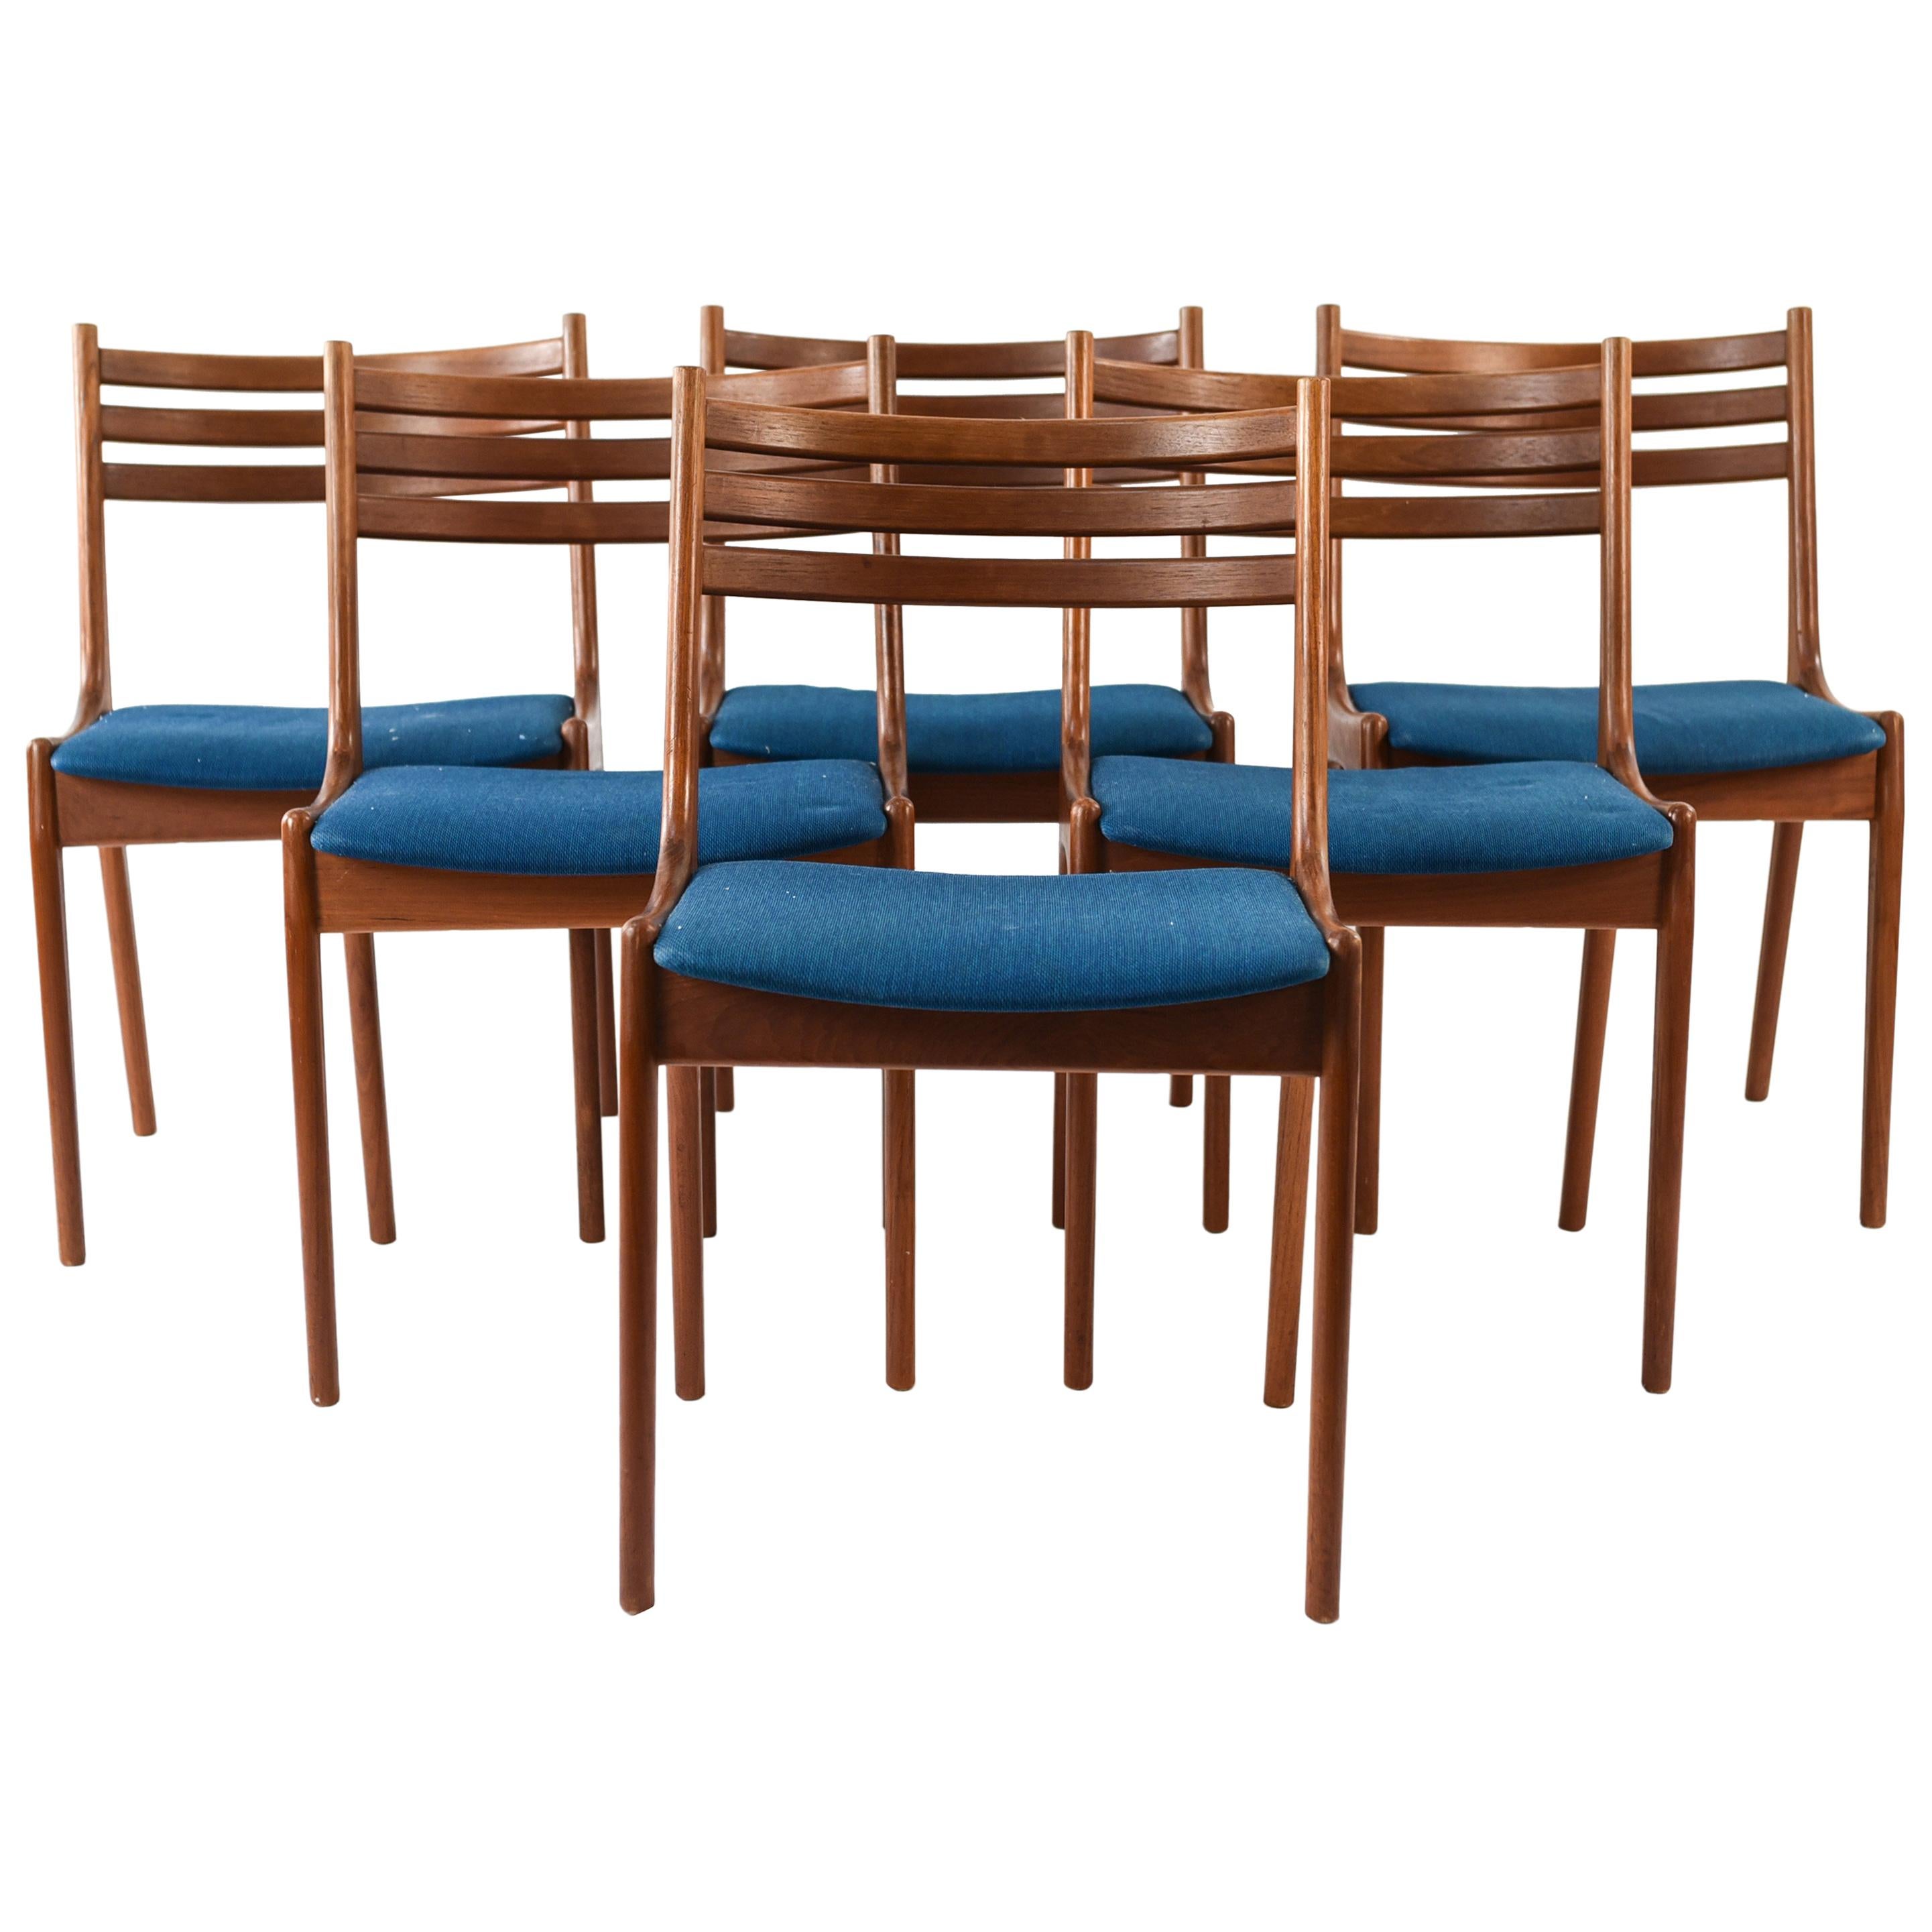 Set of Six K.S. Mobler Teak Dining Chairs Attributed to Kai Kristiansen